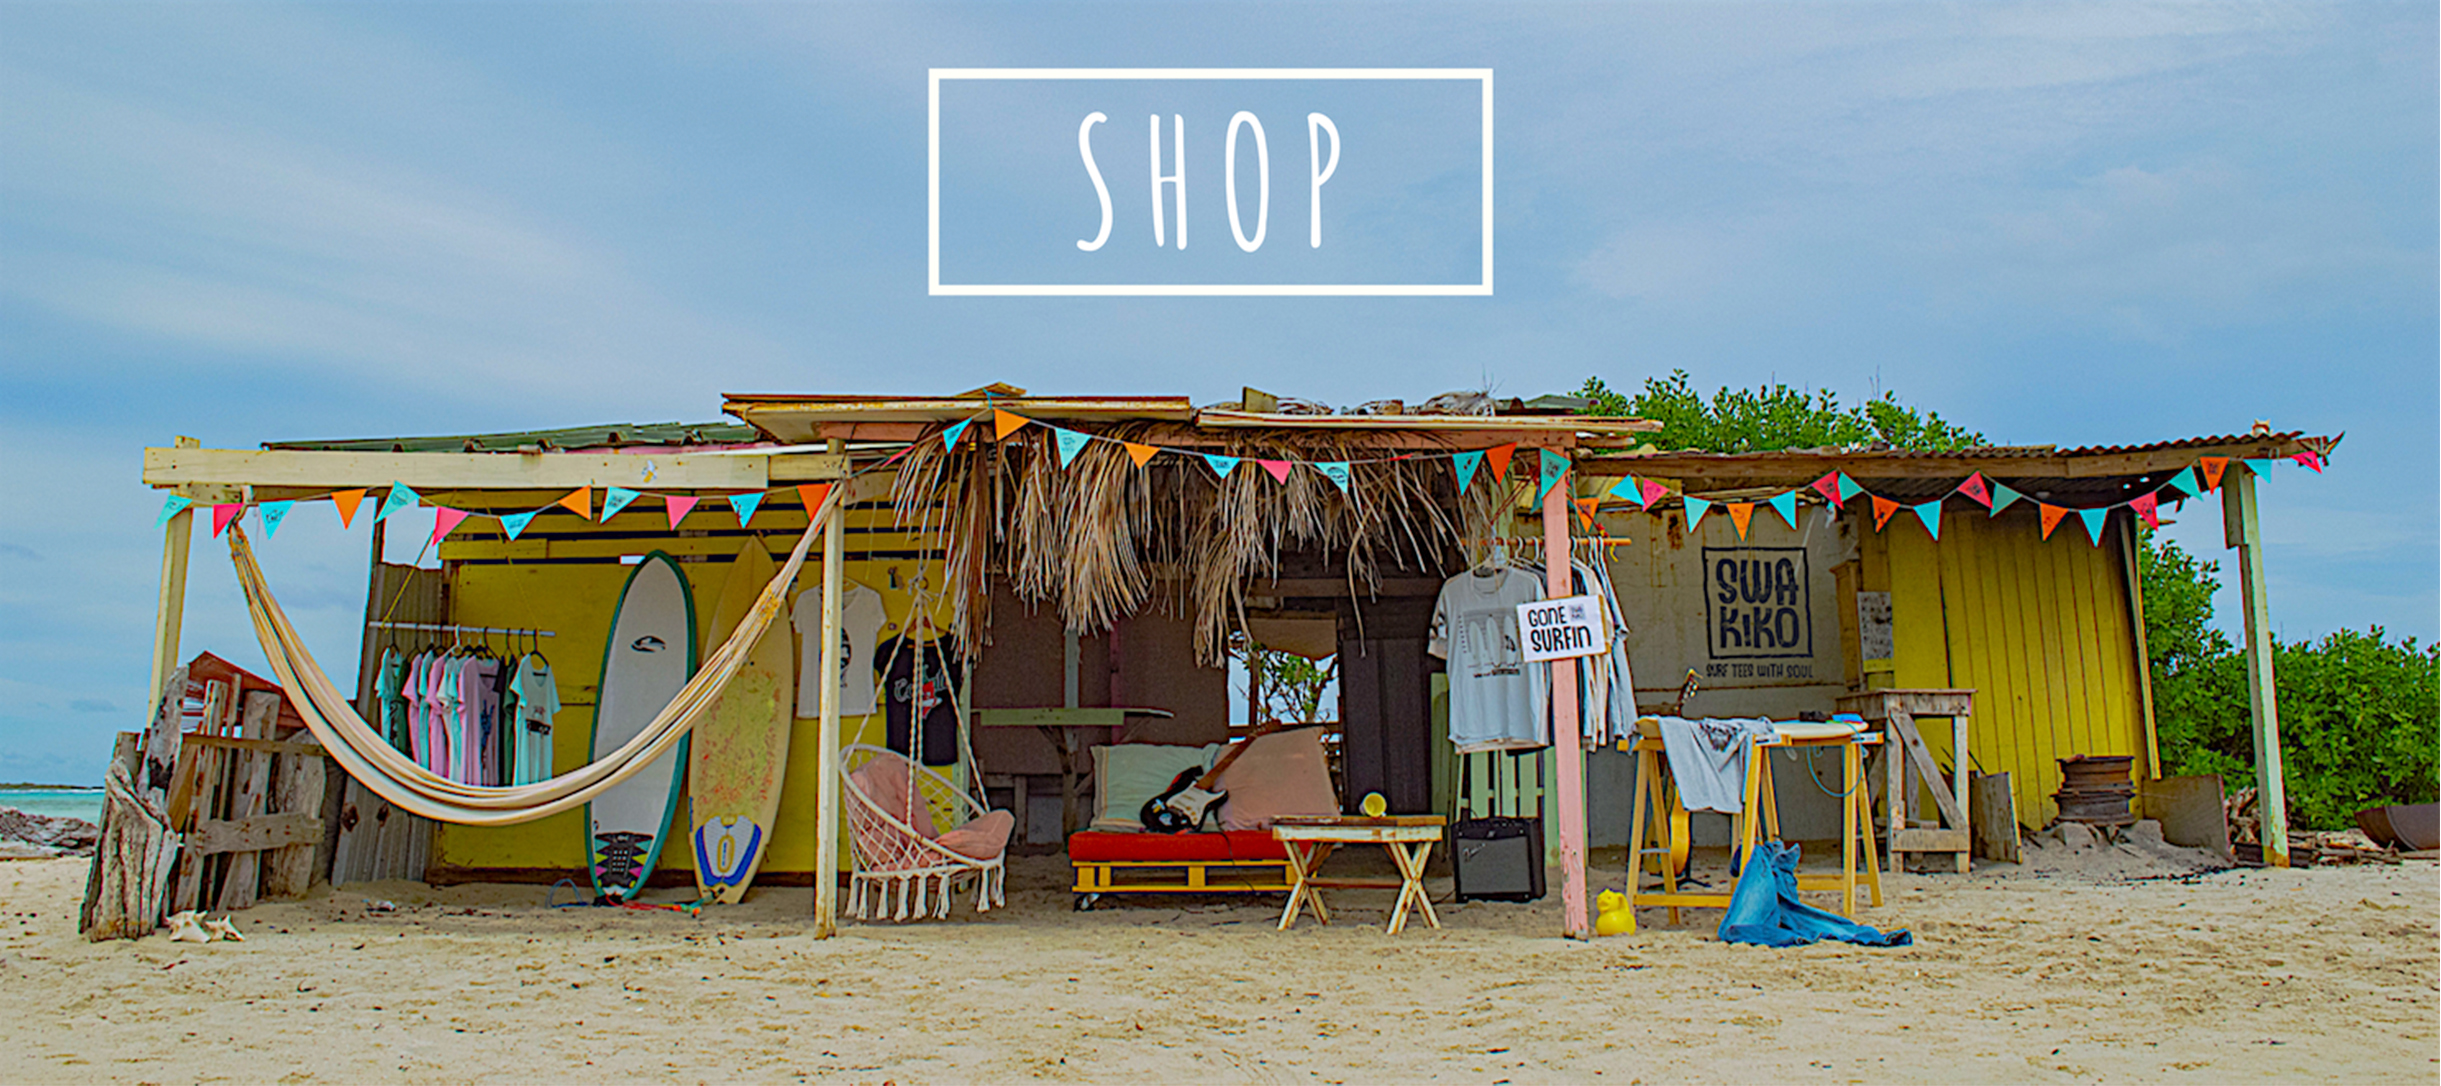 Colorful SWAKiKO surf shop on the beach at Sorobon on Bonaire, fully furnished with surfboards, shirts and garlands